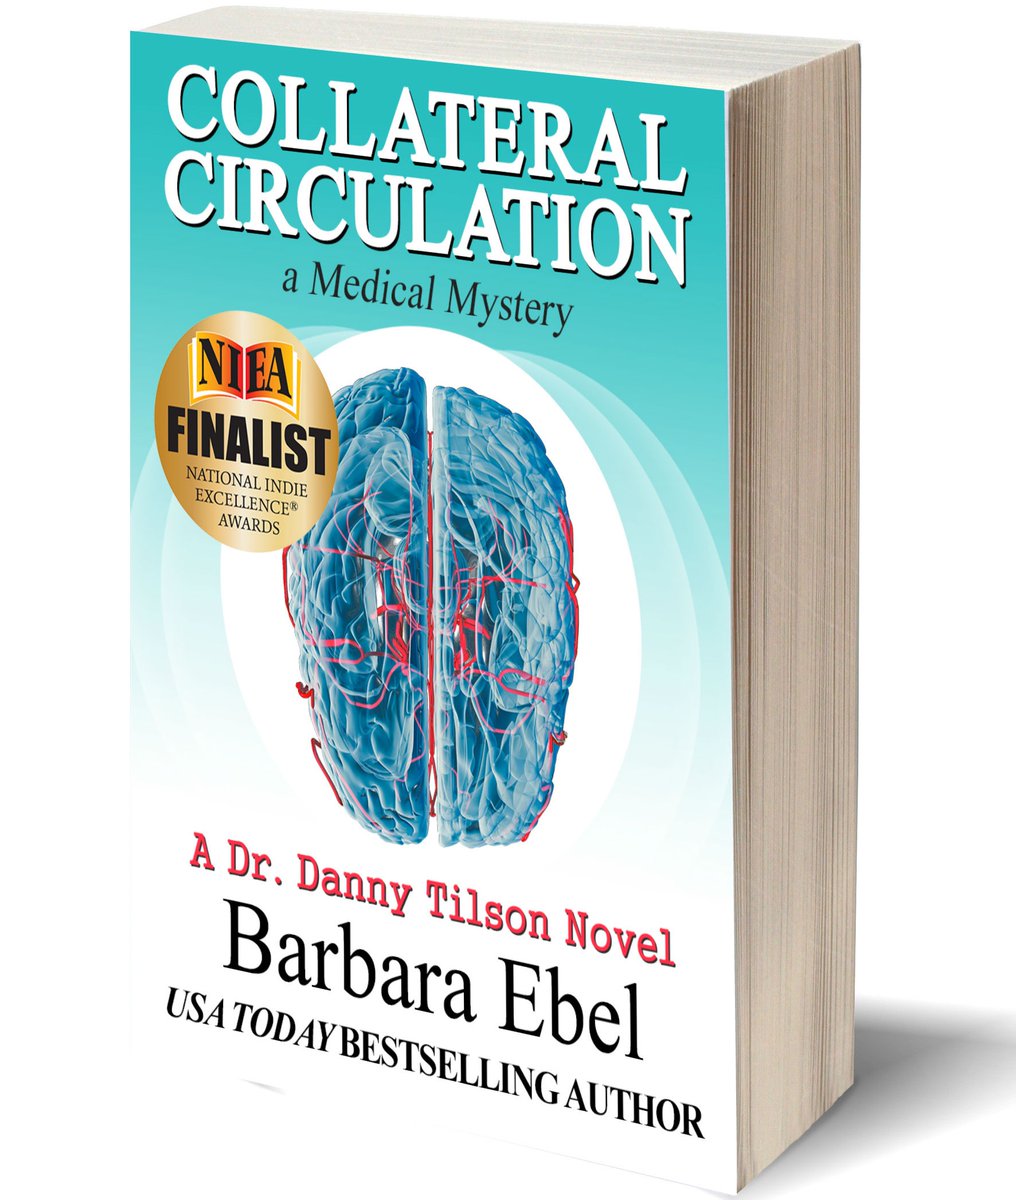 #kindlebooks #IARTG #ian1 #MedTwitter #suspense #BookTwitter #KindleUnlimited #bookseries #Medical 
#Reading #weekendread #anatomy #surgery #Neurosurgery #awardwinning 

A neurosurgeon makes a shocking discovery!

mybook.to/Collateral-Cir…

Will it affect all mankind?!